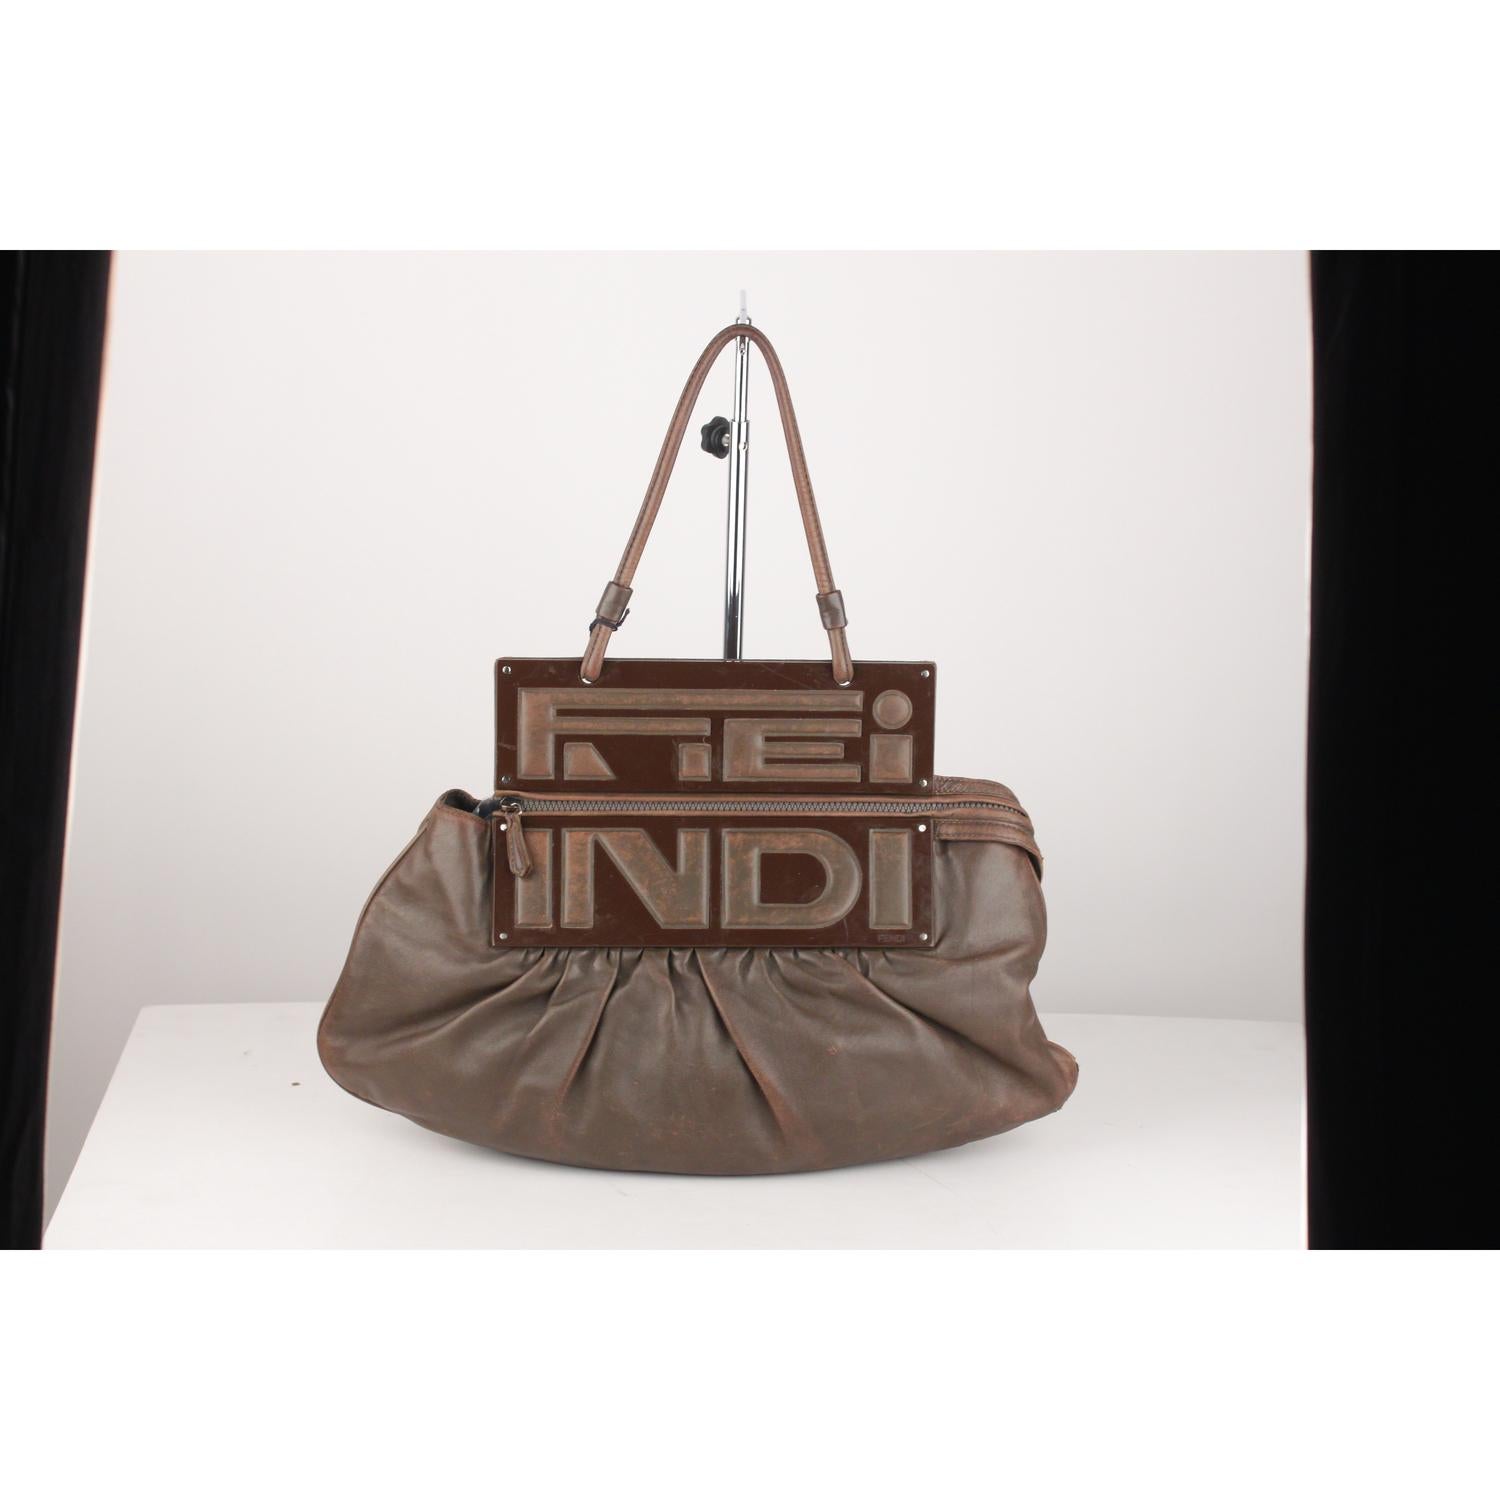 - Fendi Brown Leather 'To You Convertible Clutch Bag' 
- Gorgeous draped leather in brown color
- Resin panels with a fold over flap (can be carried by the handle or folded over for a clutch look)
- Top carry handle
- Zip top closure
- Brown fabric